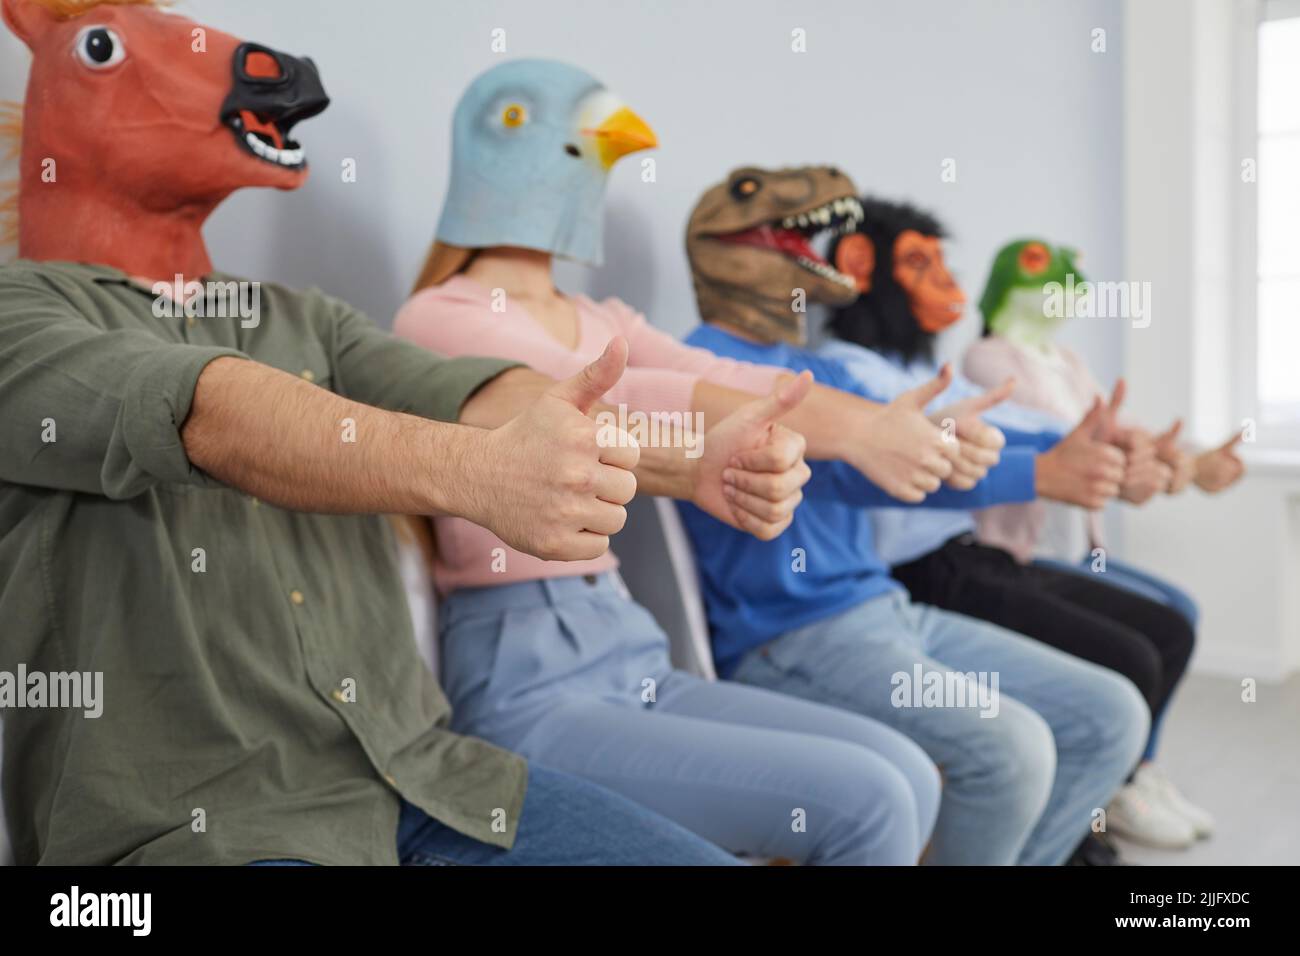 Group of strange men and women wearing funny animal masks giving thumbs up together Stock Photo